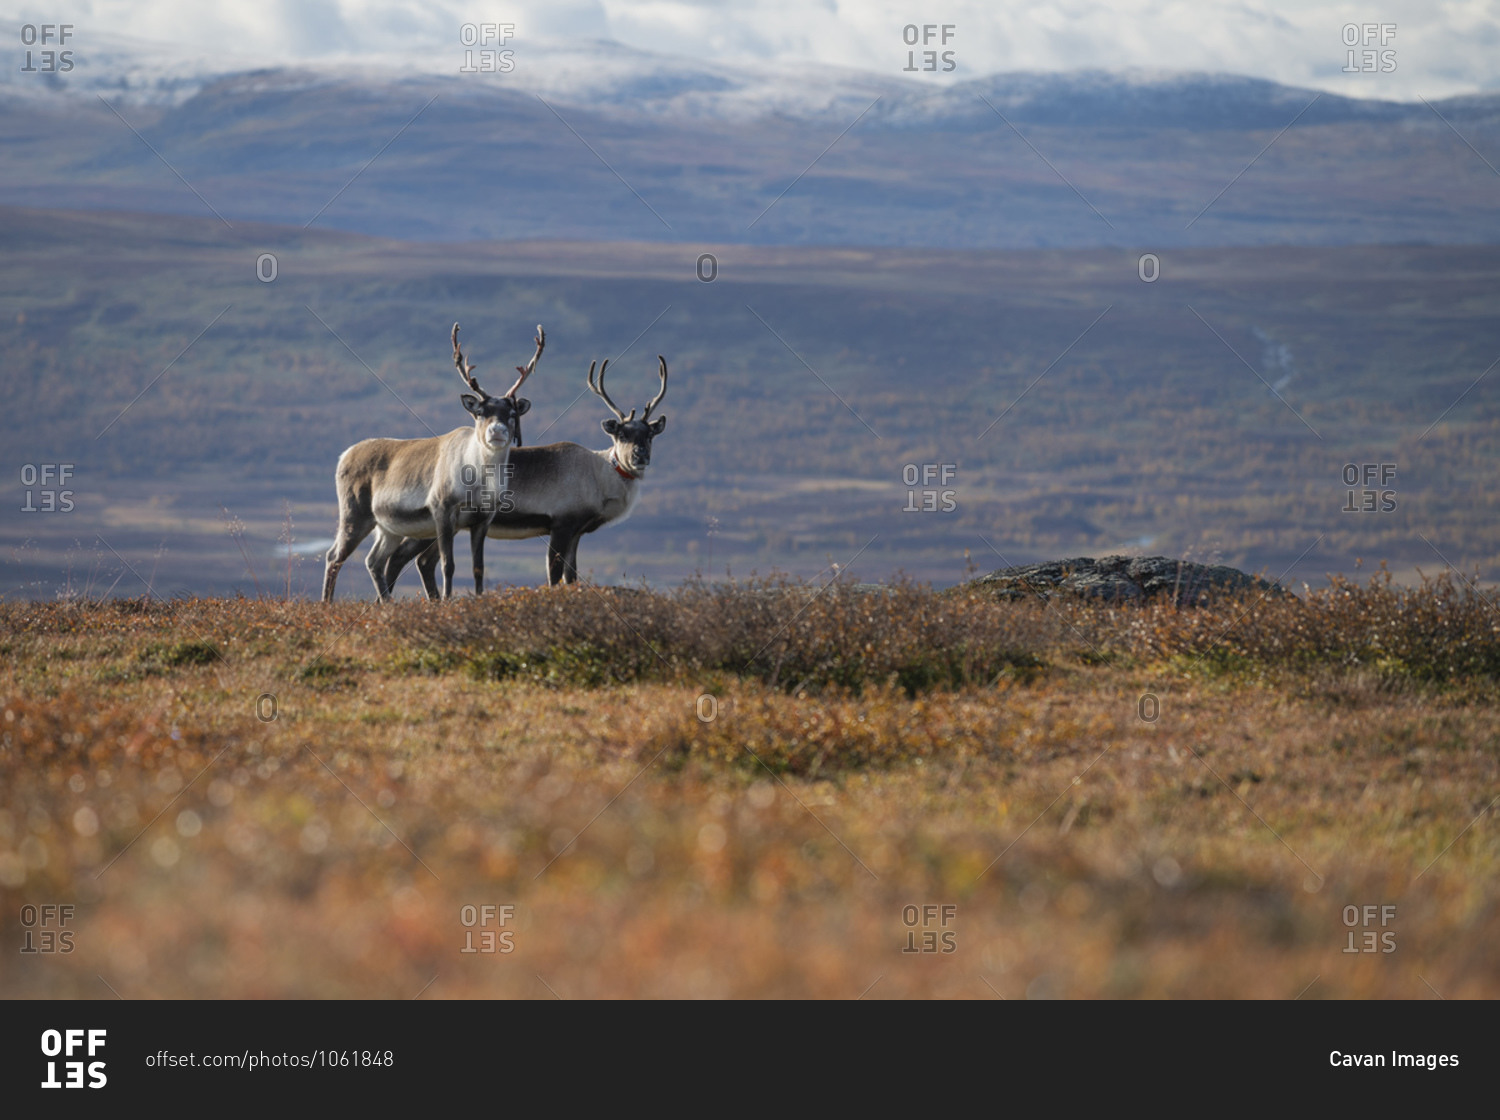 Two reindeer look at camera in autumn mountain landscape along Kungsleden Trail, Lapland, Sweden